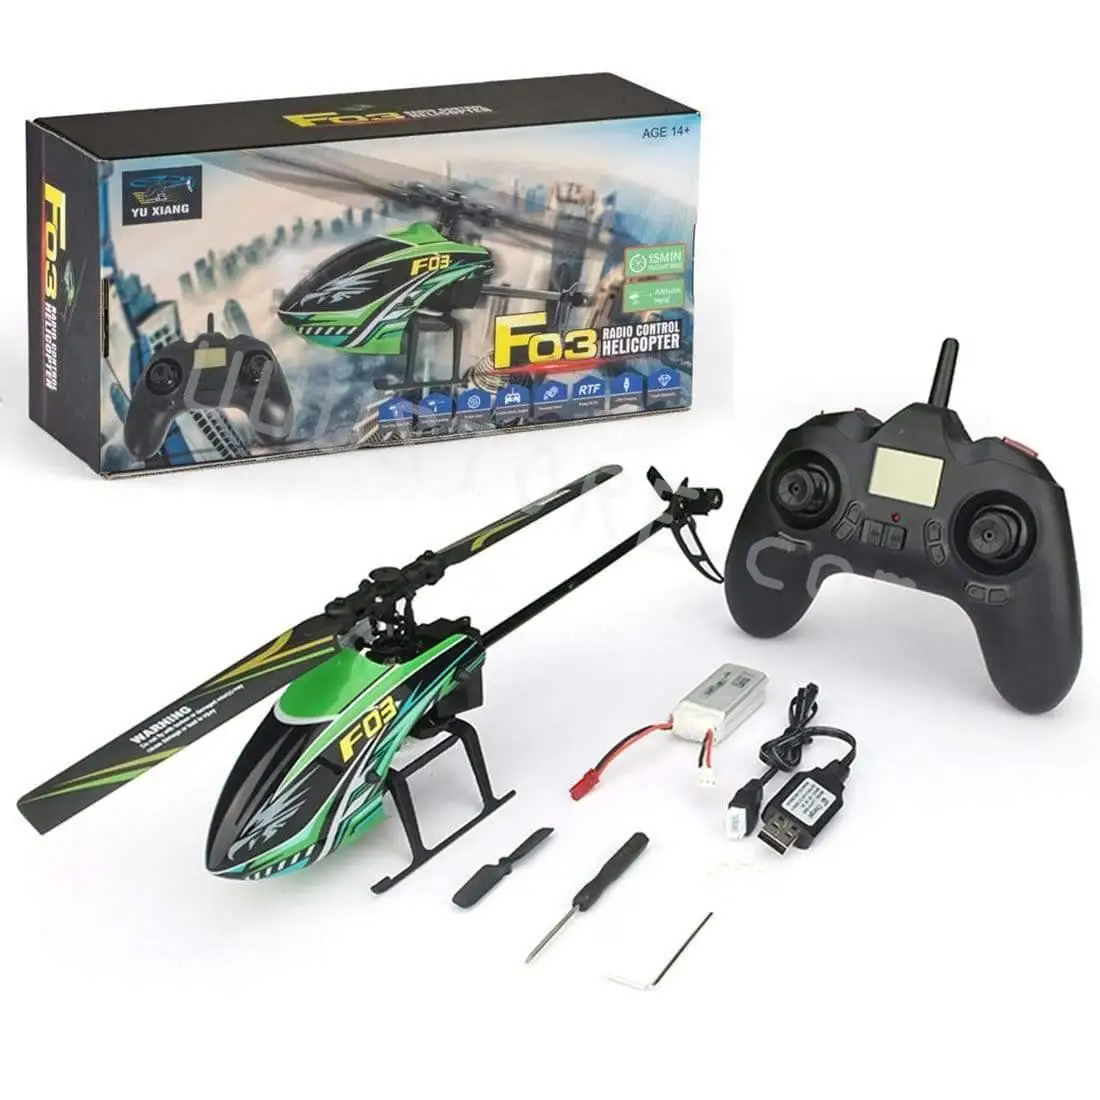 

YX F03 Helicopter 2.4Ghz 4CH 6-aix Gyro Flybarless RC Helicopter RTF V911s Altitude Control One Key To Take Off/land RC Toys